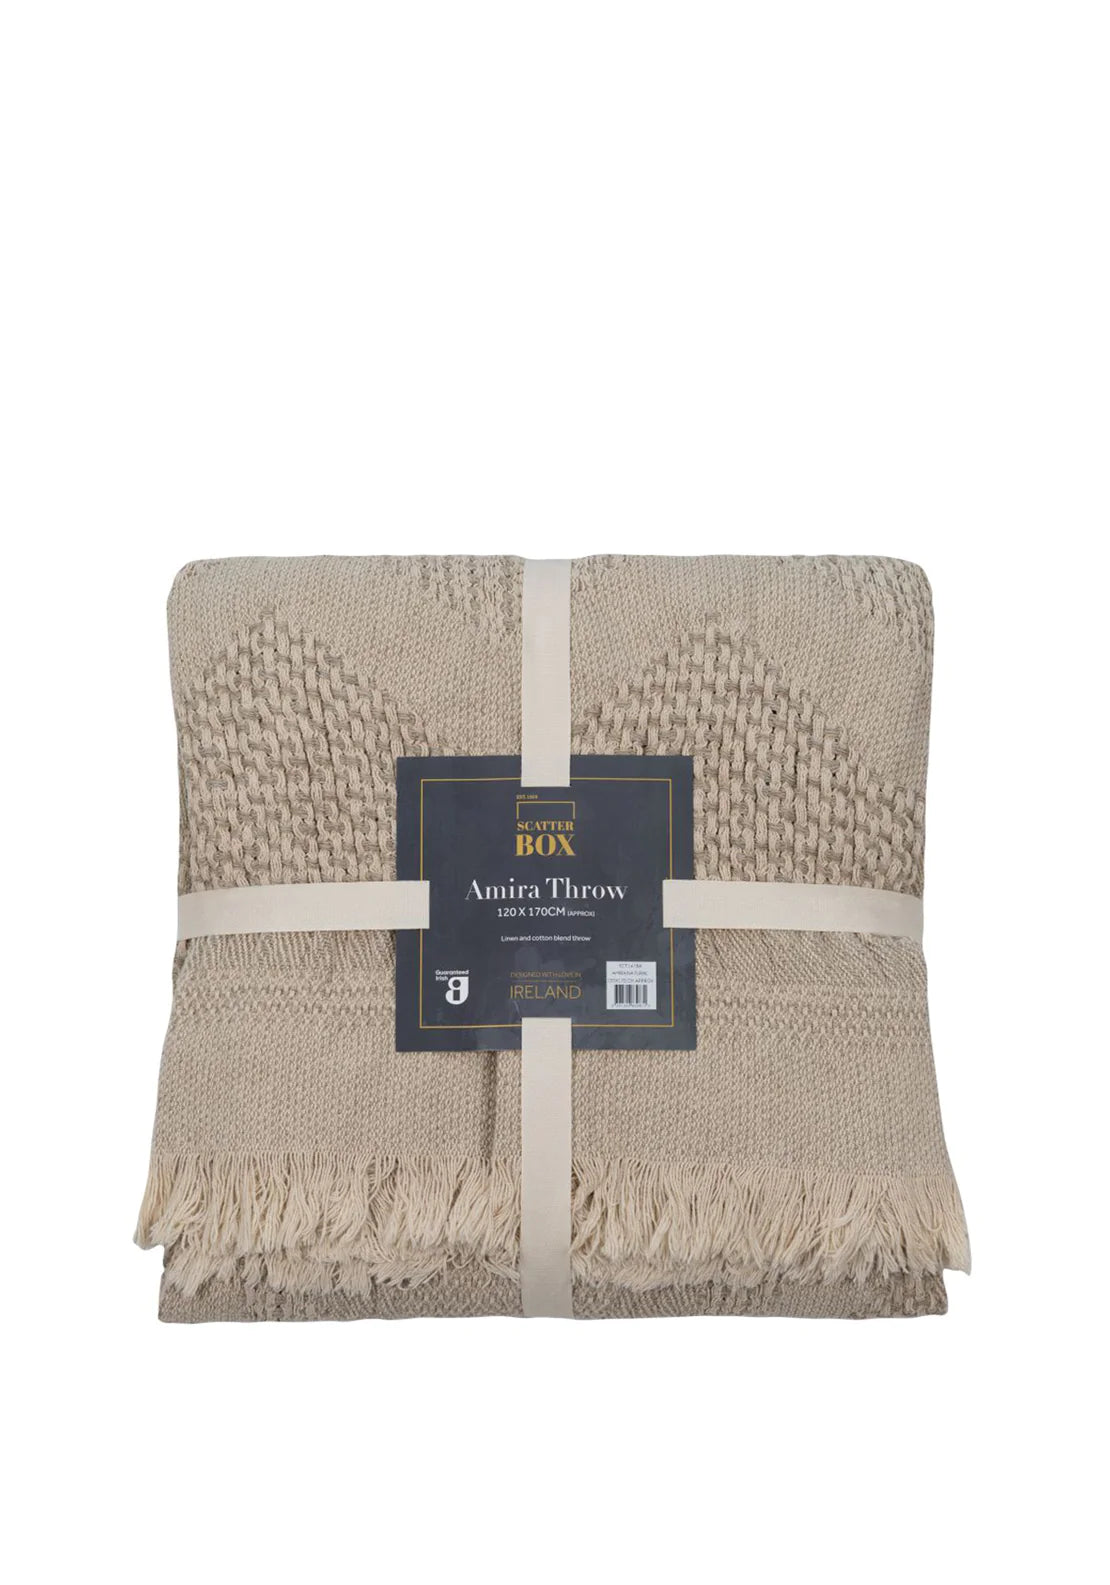 SCATTERBOX THROW AMIRA 120X170CM NATURAL